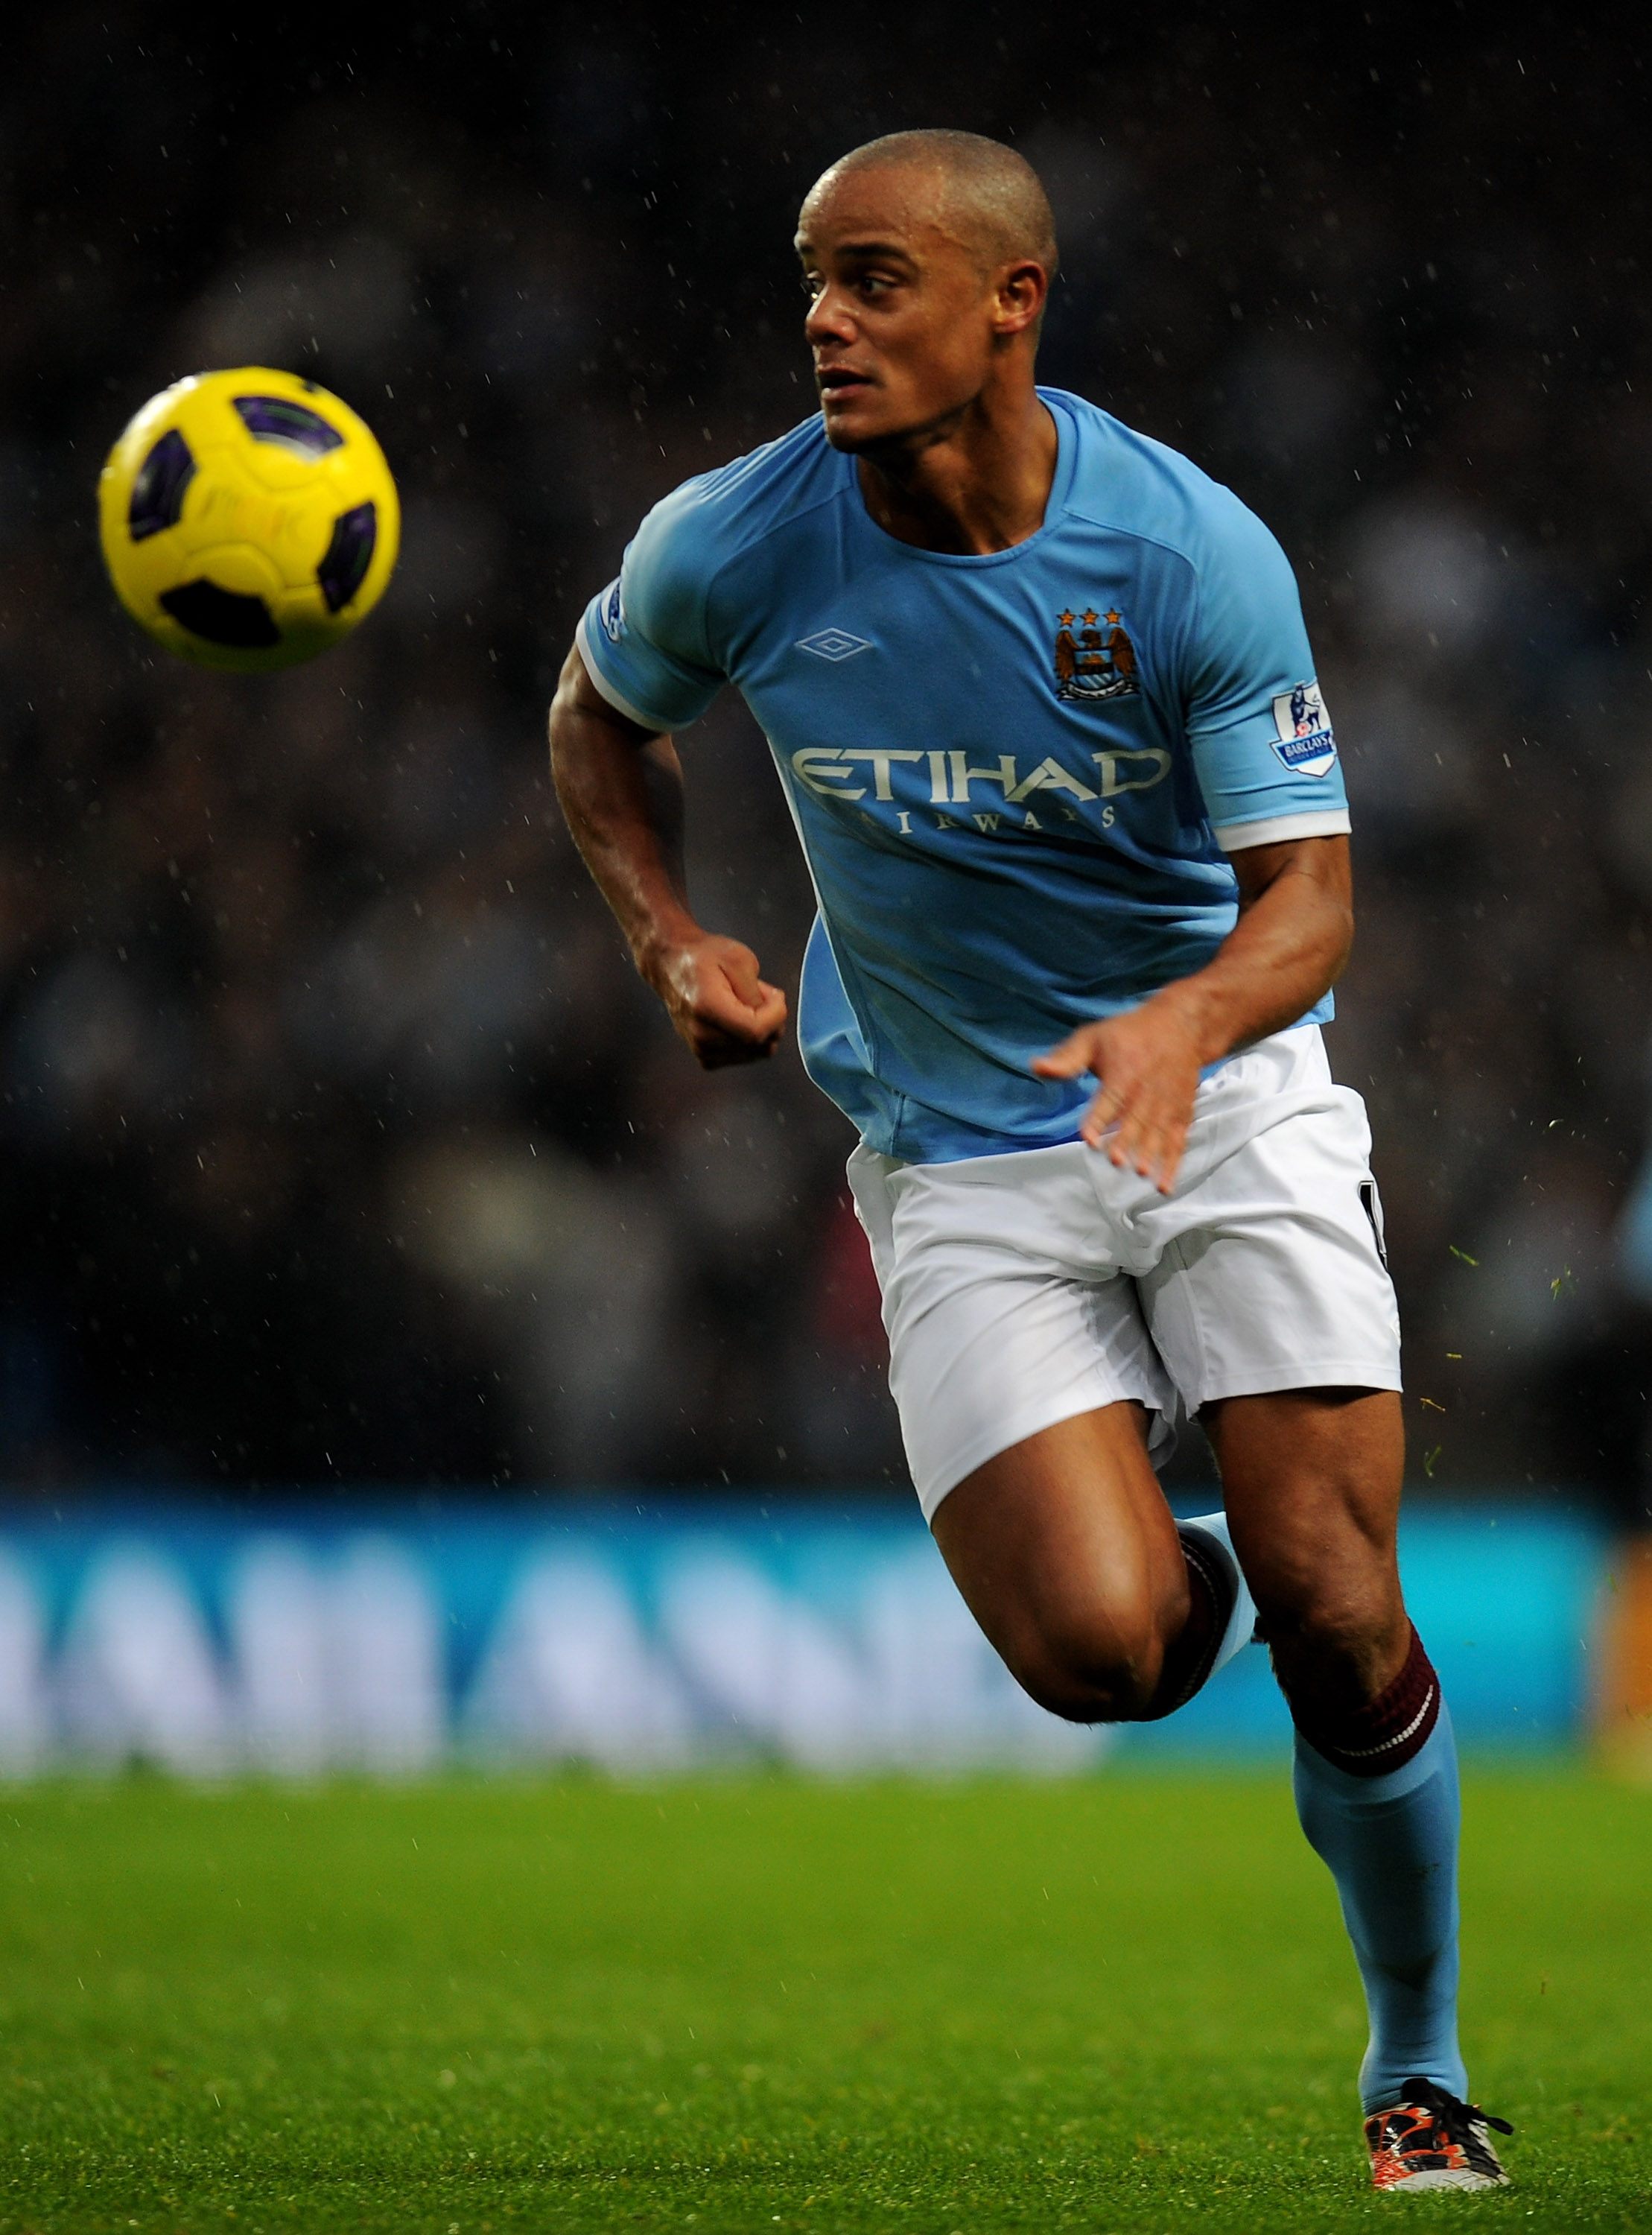 MANCHESTER, ENGLAND - DECEMBER 04:   Vincent Kompany of Manchester City in action during the Barclays Premier League match between Manchester City and Bolton Wanderers at the City of Manchester Stadium on December 4, 2010 in Manchester, England.  (Photo b